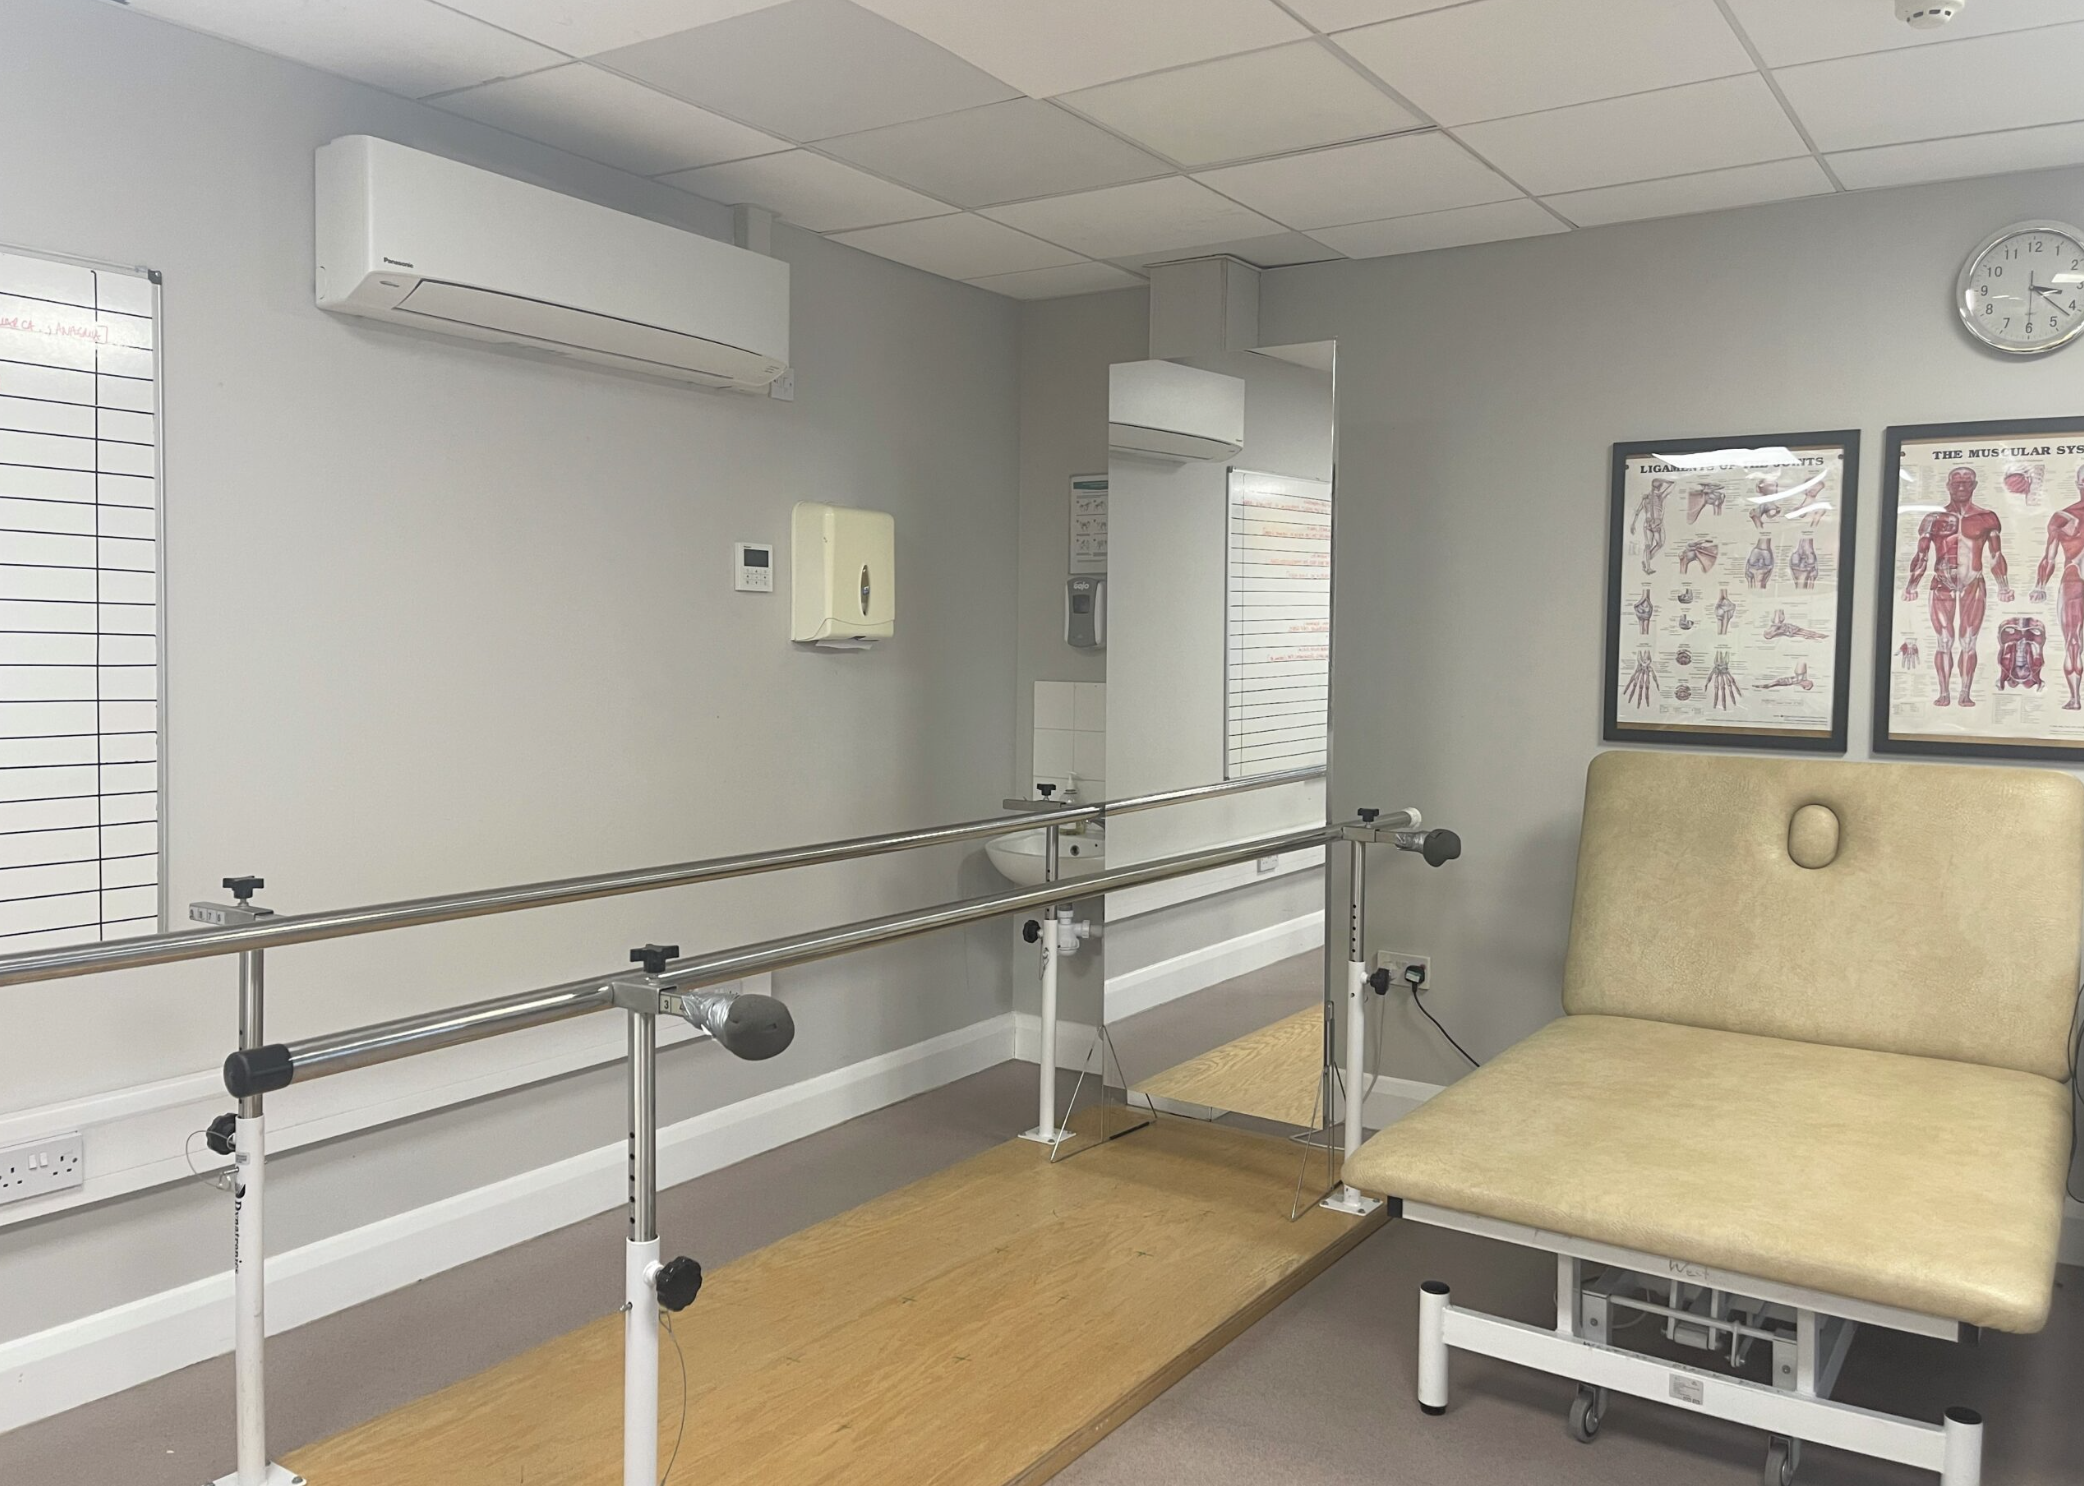 Physiotherapy of Westgate House care home in Ware, Hertfordshire